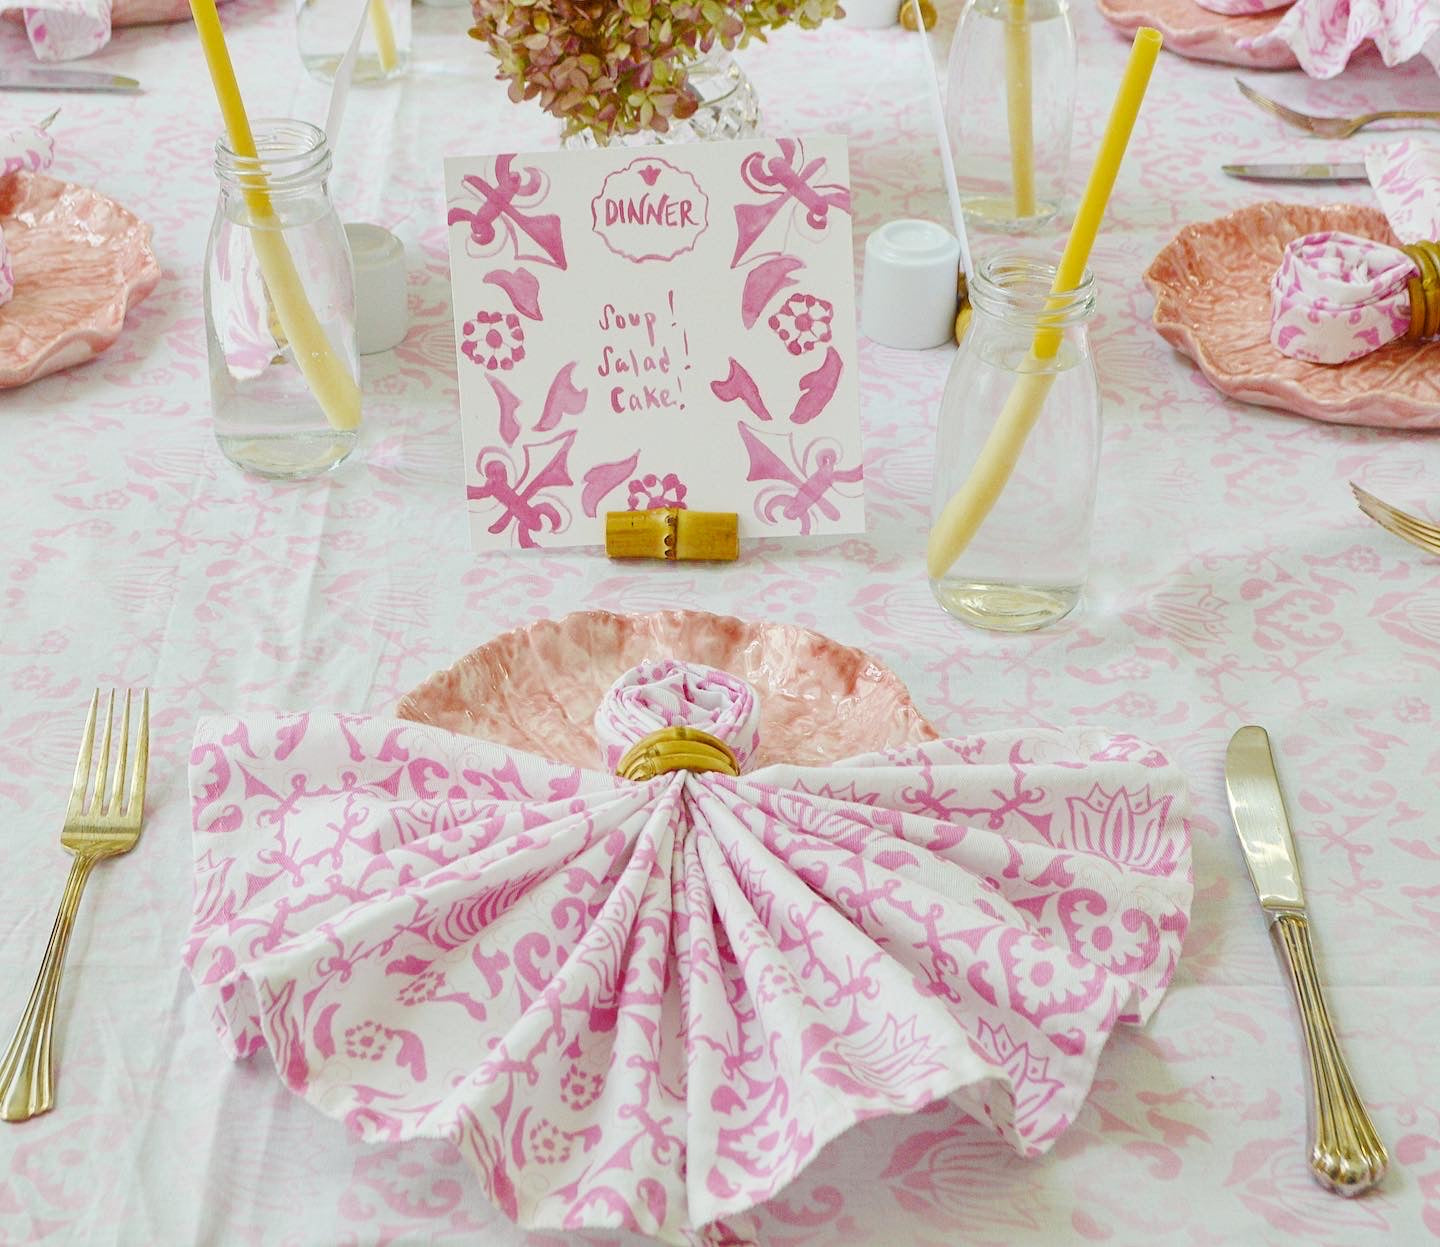 Chefanie Pink Tablecape for Bridal Shower Baby Shower or Galentines